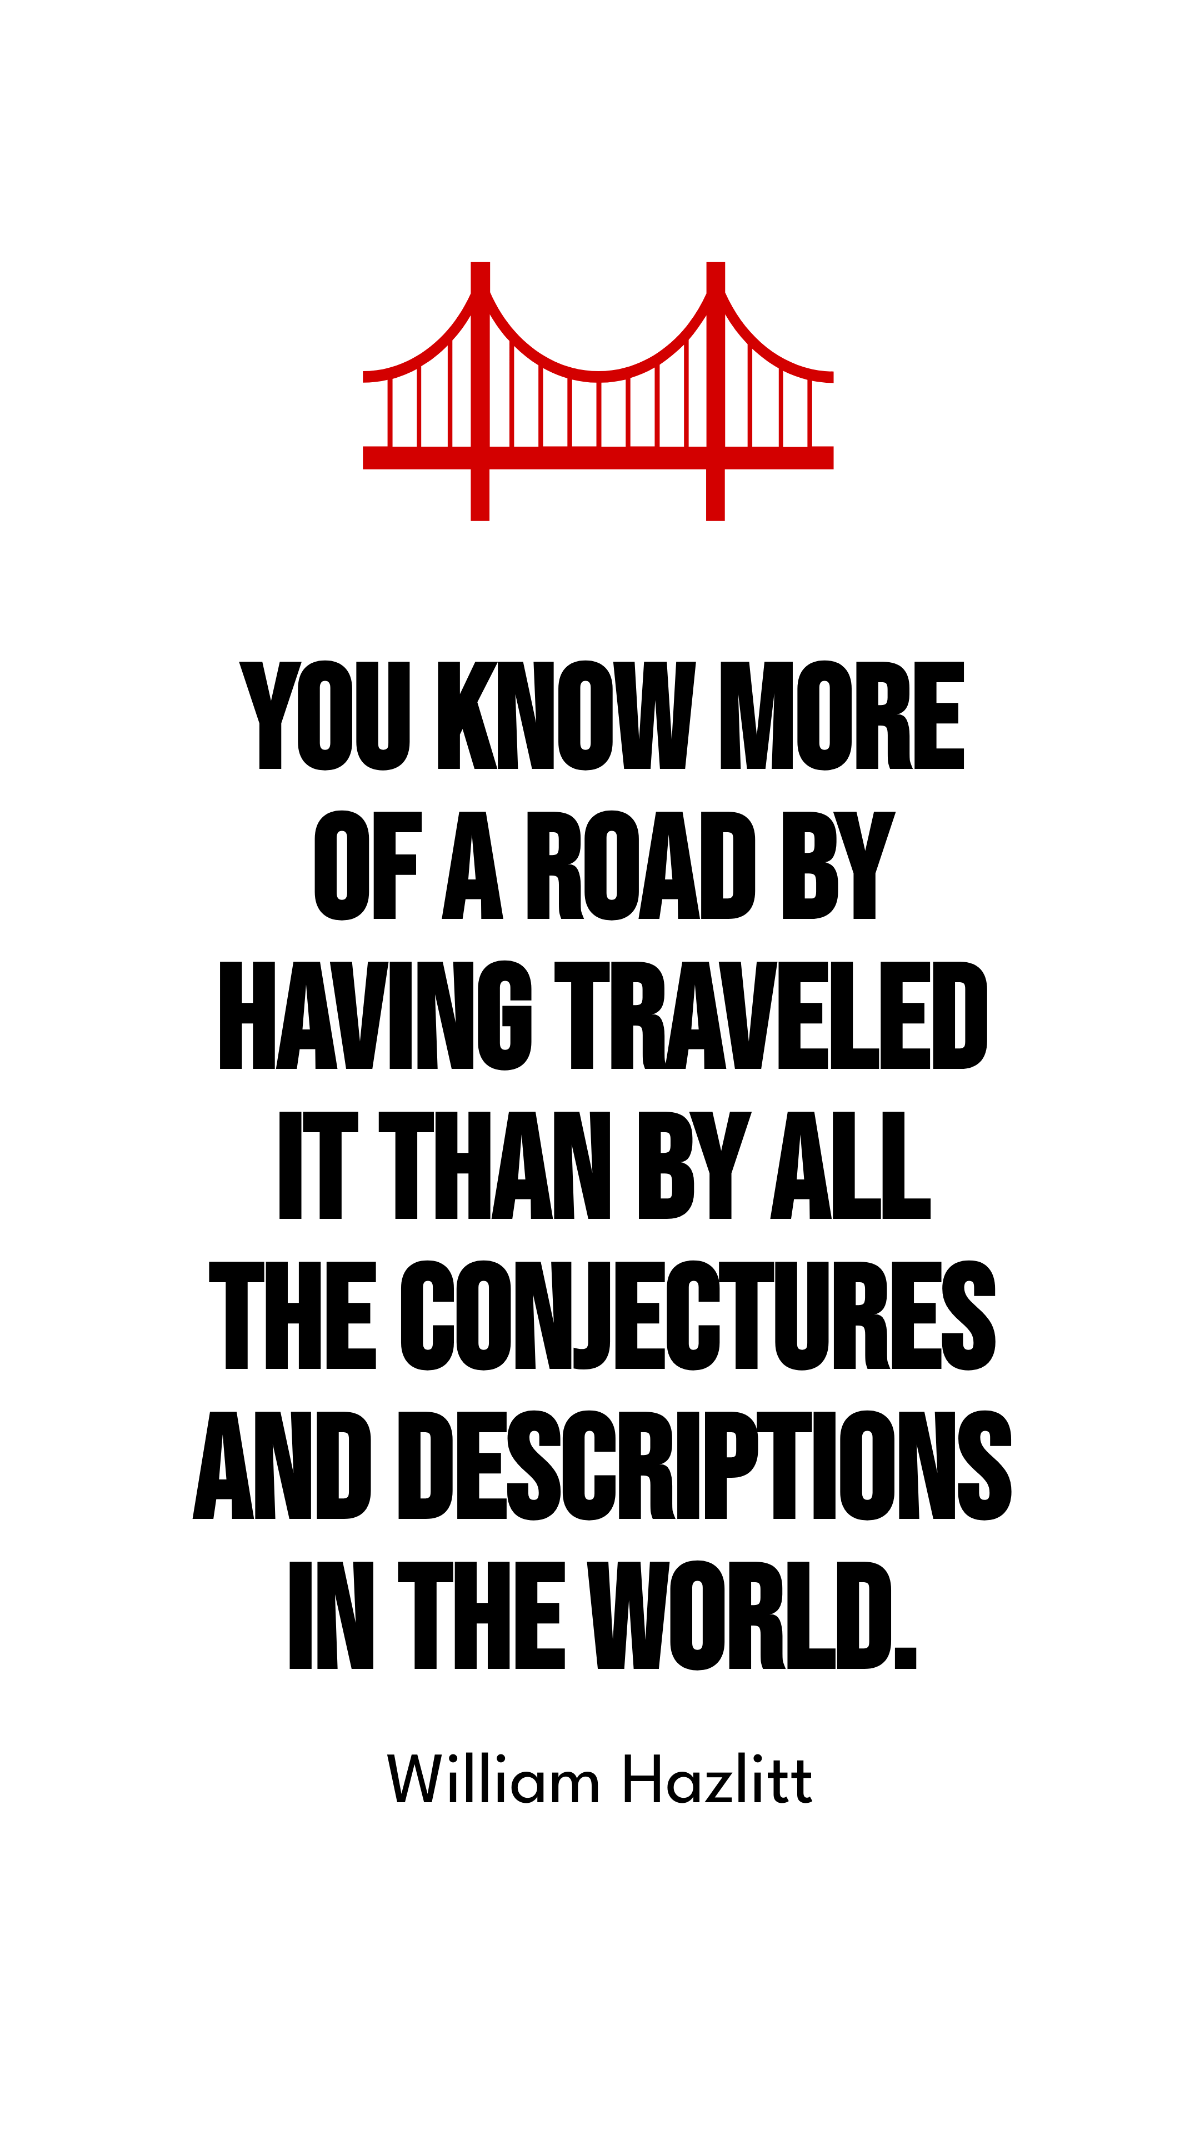 William Hazlitt - You know more of a road by having traveled it than by all the conjectures and descriptions in the world. Template